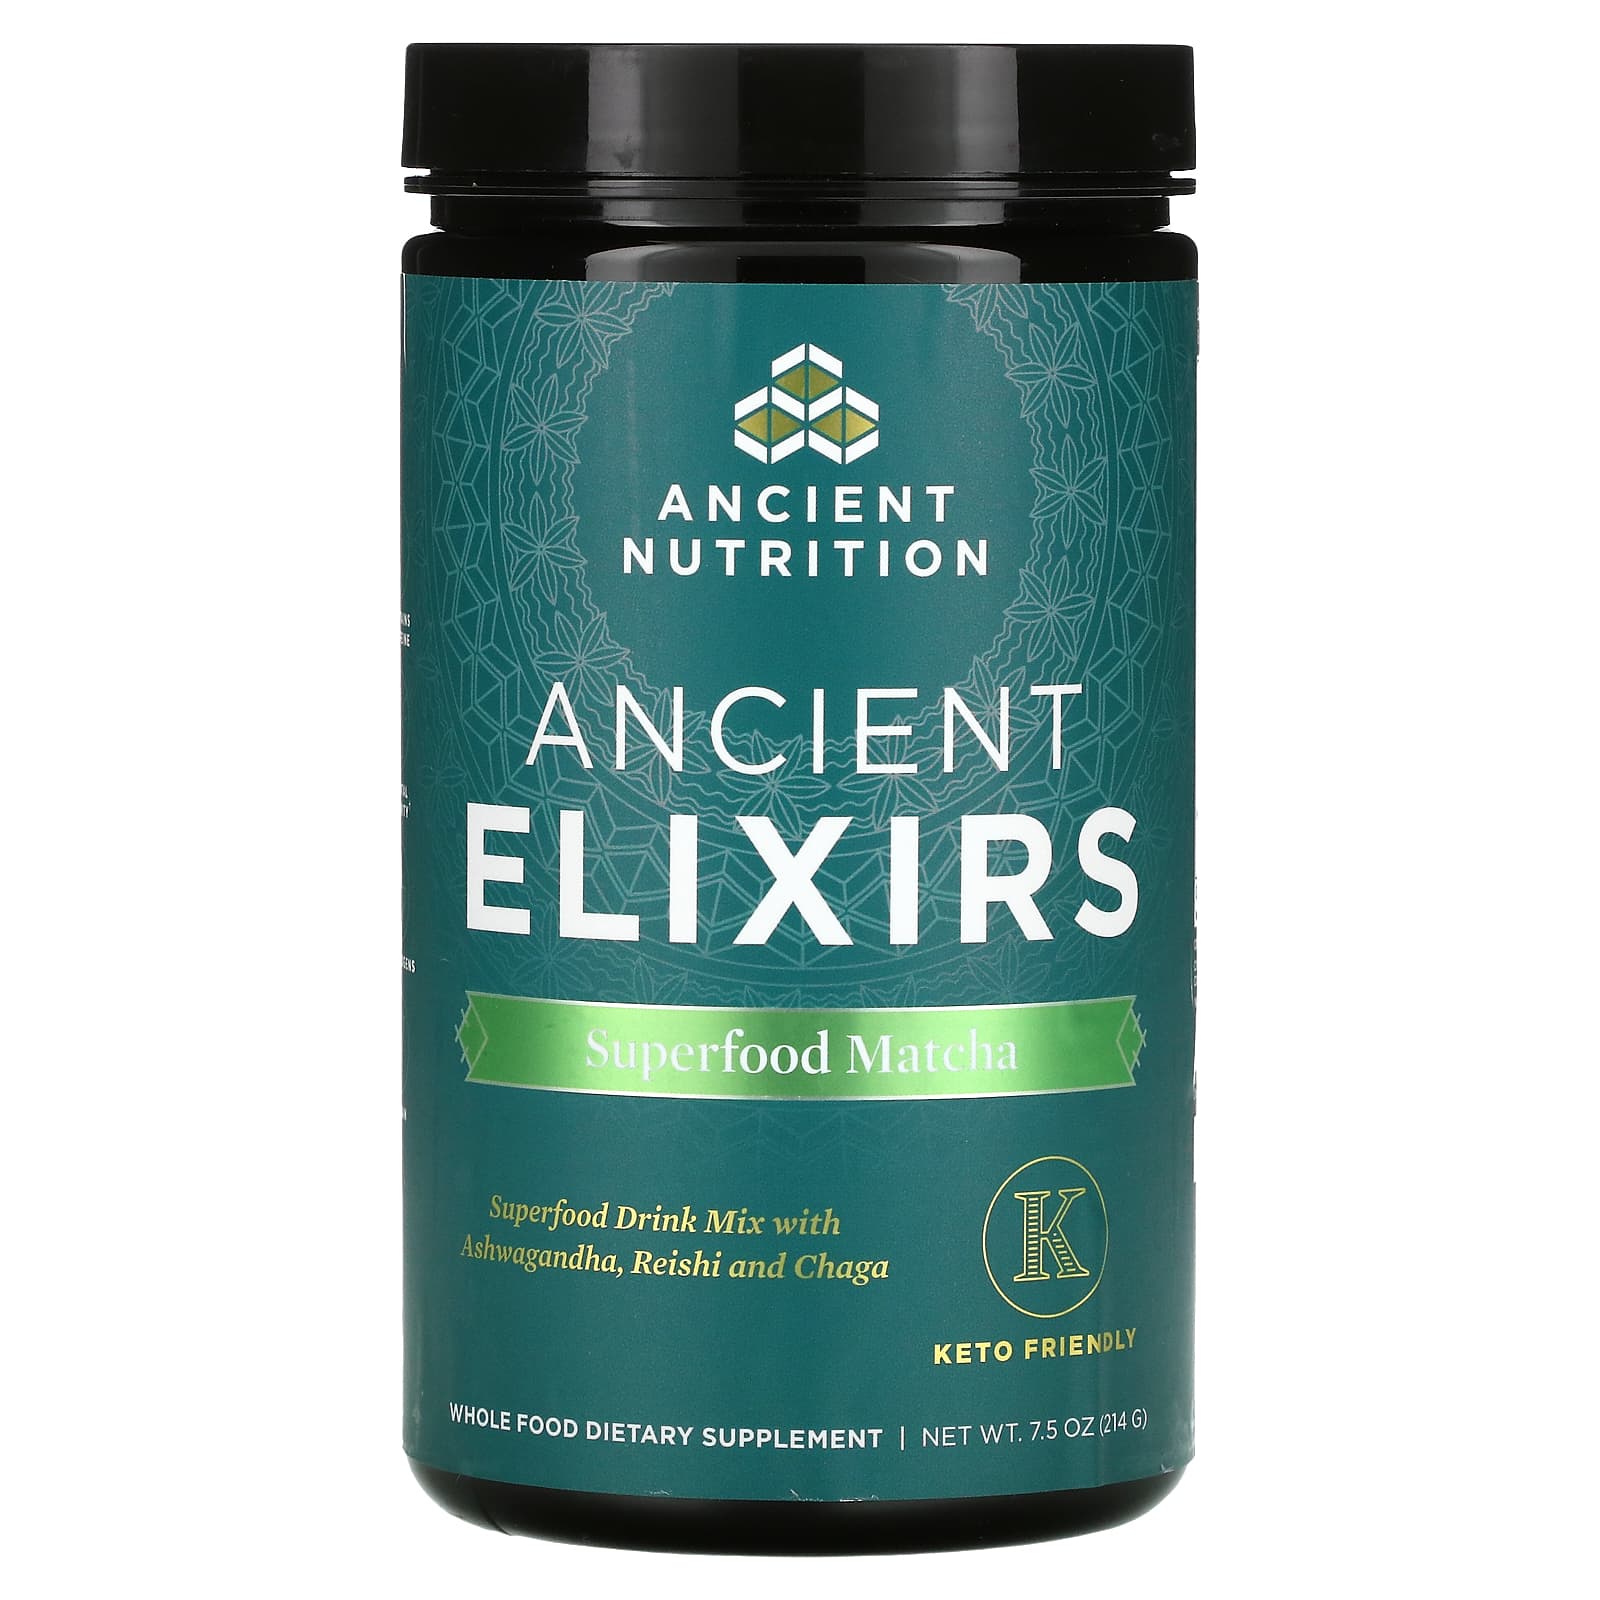 Dr. Axe / Ancient Nutrition, Ancient Elixirs, Superfood Matcha, 7.5 oz (214  g)